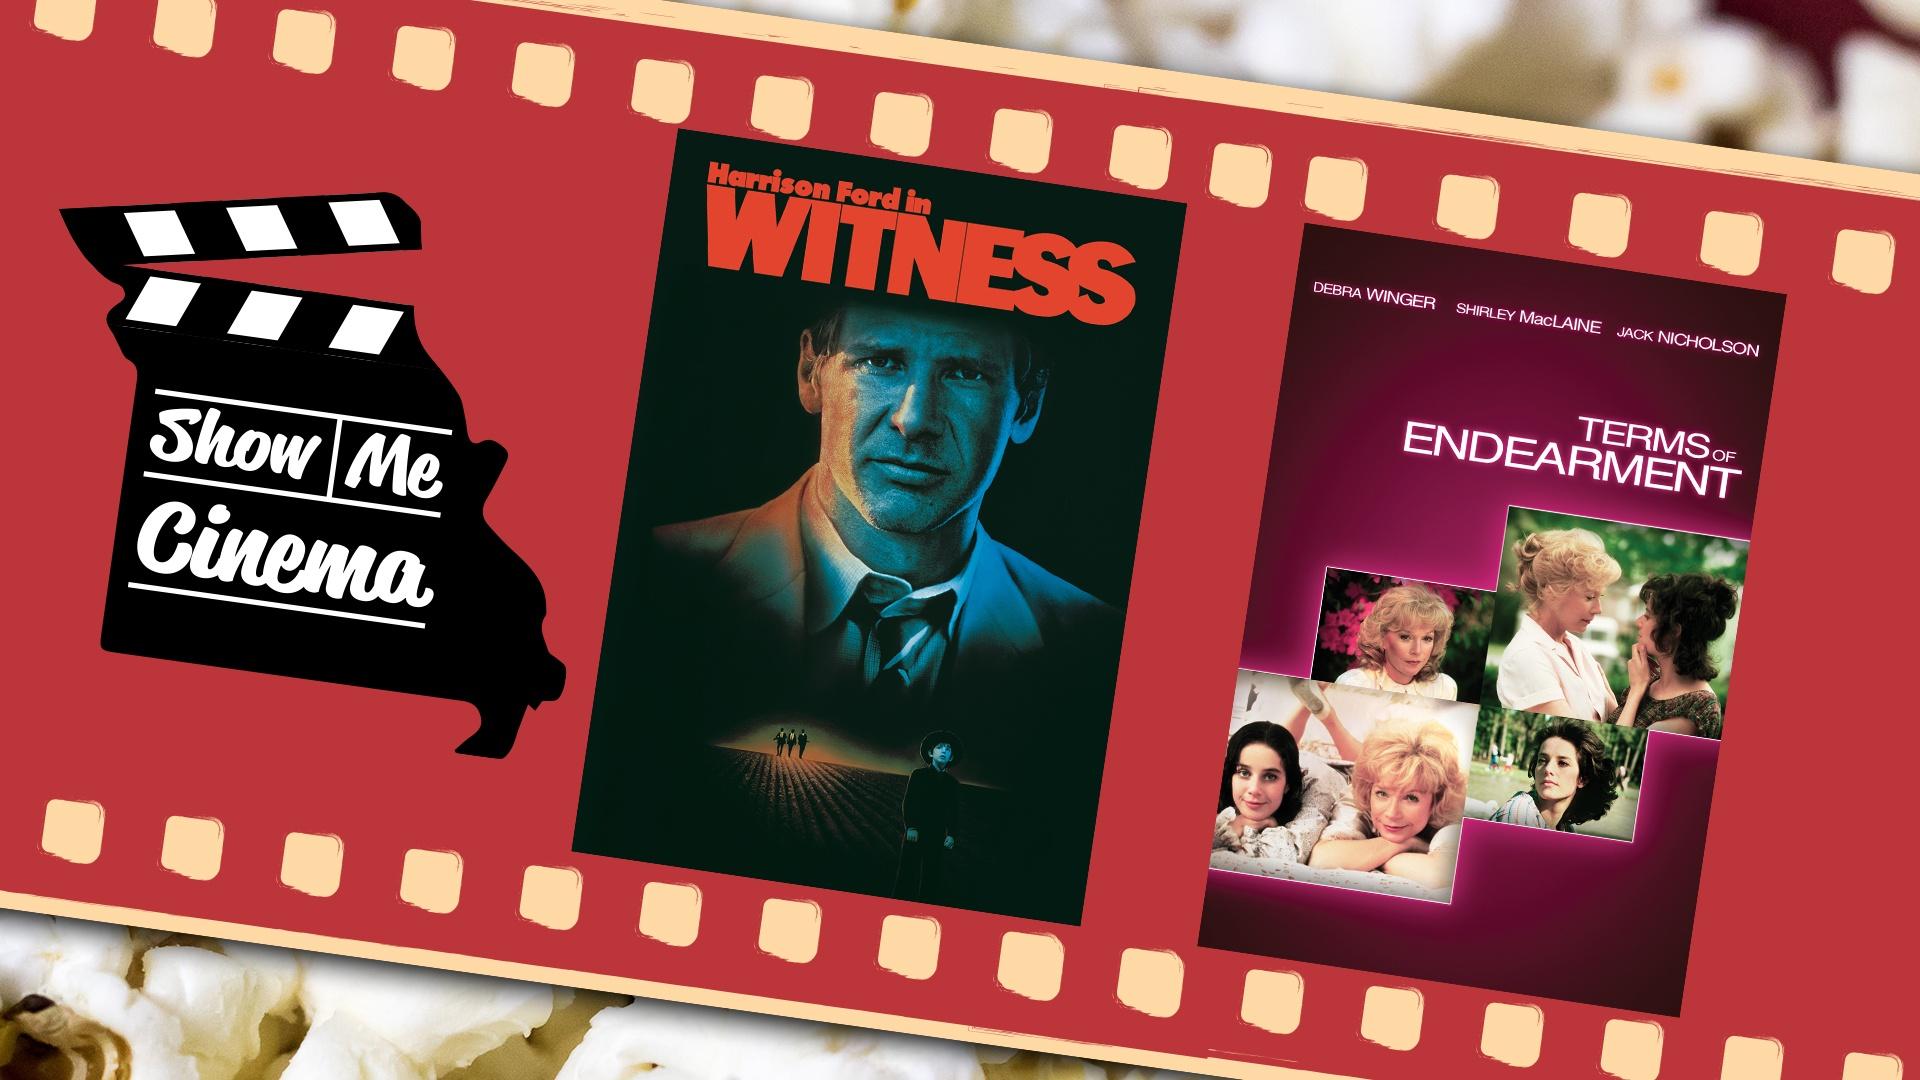 Show-Me Cinema: Witness and Terms of Endearment